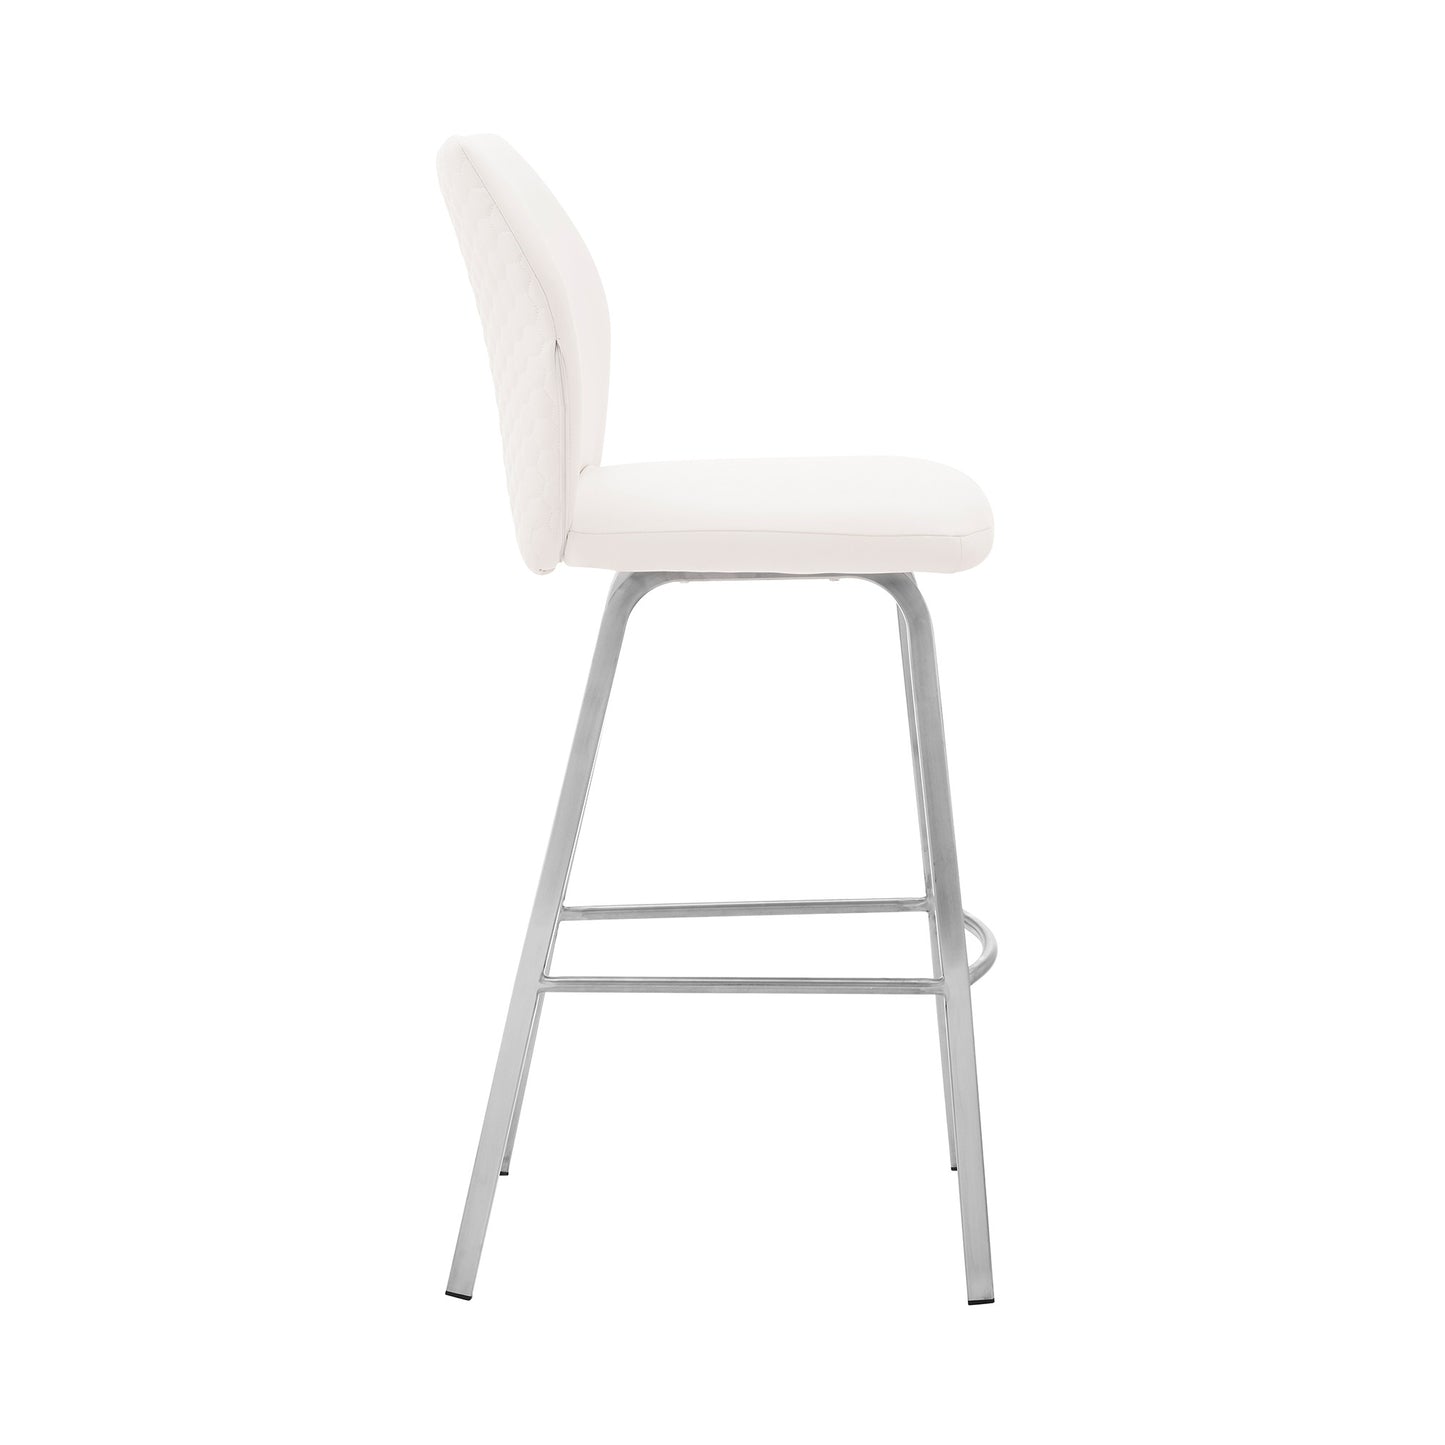 42" White Faux Leather And Iron Bar Height Chair By Homeroots